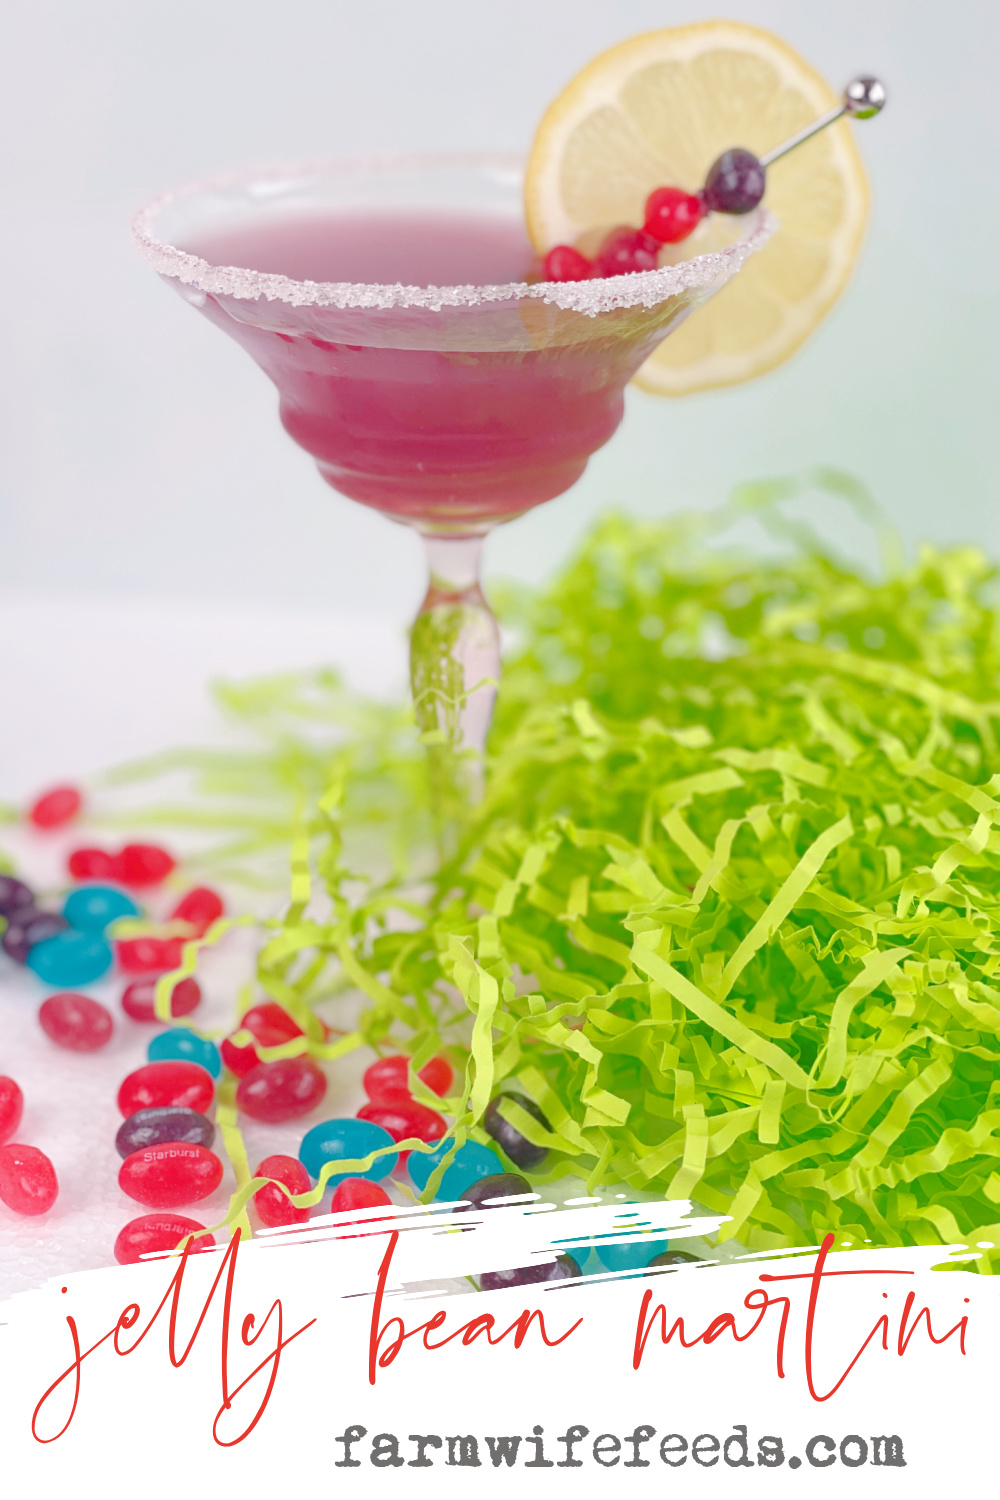 Jelly Bean Martini, Jelly Bean-tini from Farmwife Feeds, a fun Easter version of a vodka martini using your favorite jelly bean flavor. #jellybeans #easter #cocktail #martini